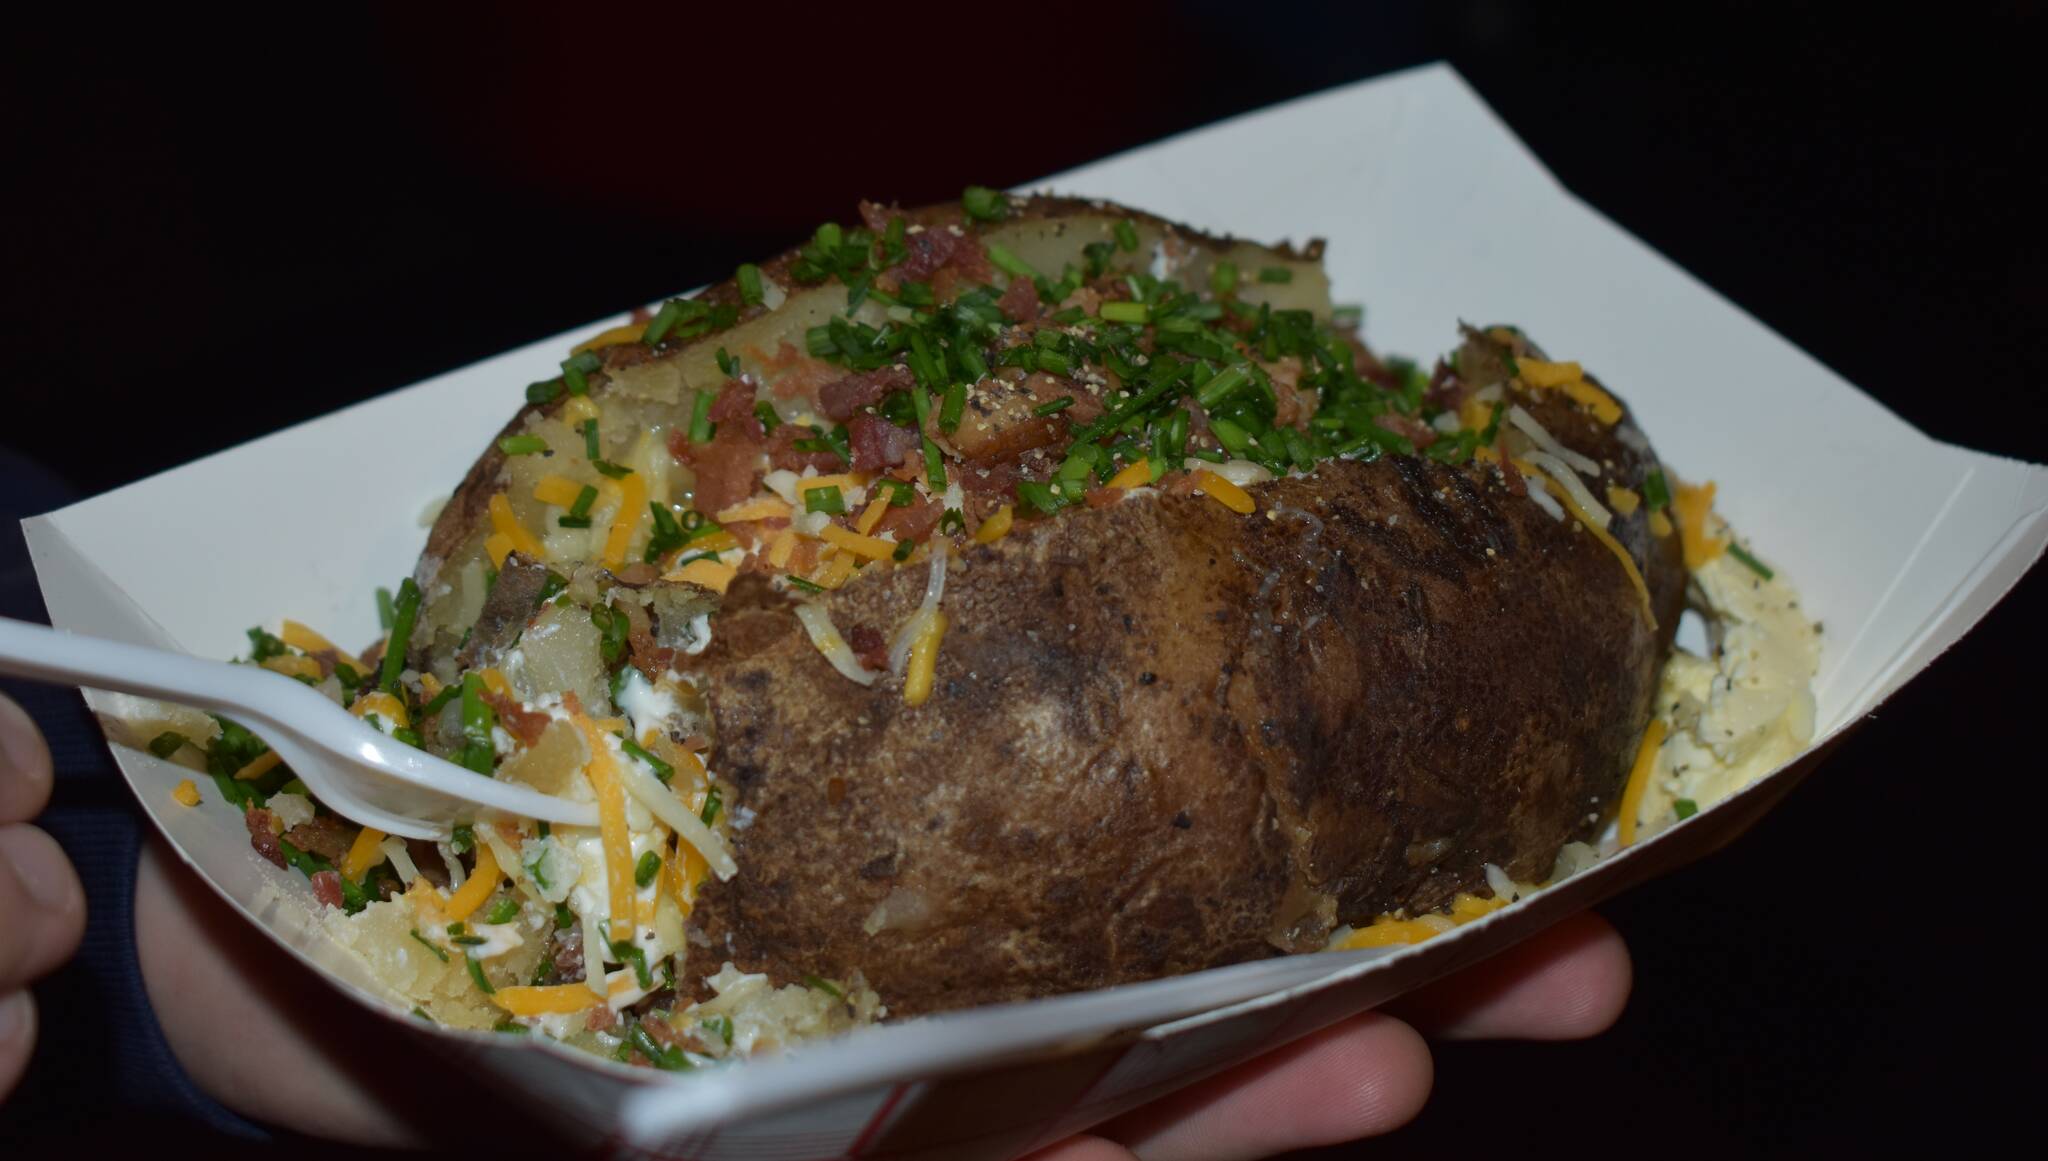 Hundreds of freshly baked potatoes with all the fixings were available to all guests for $5 during the Baked Potato Feed and Dollar Auction fundraiser for the Grays Harbor Timberwolves on Saturday, Jan. 21, in Aberdeen. (Allen Leister / The Daily World)